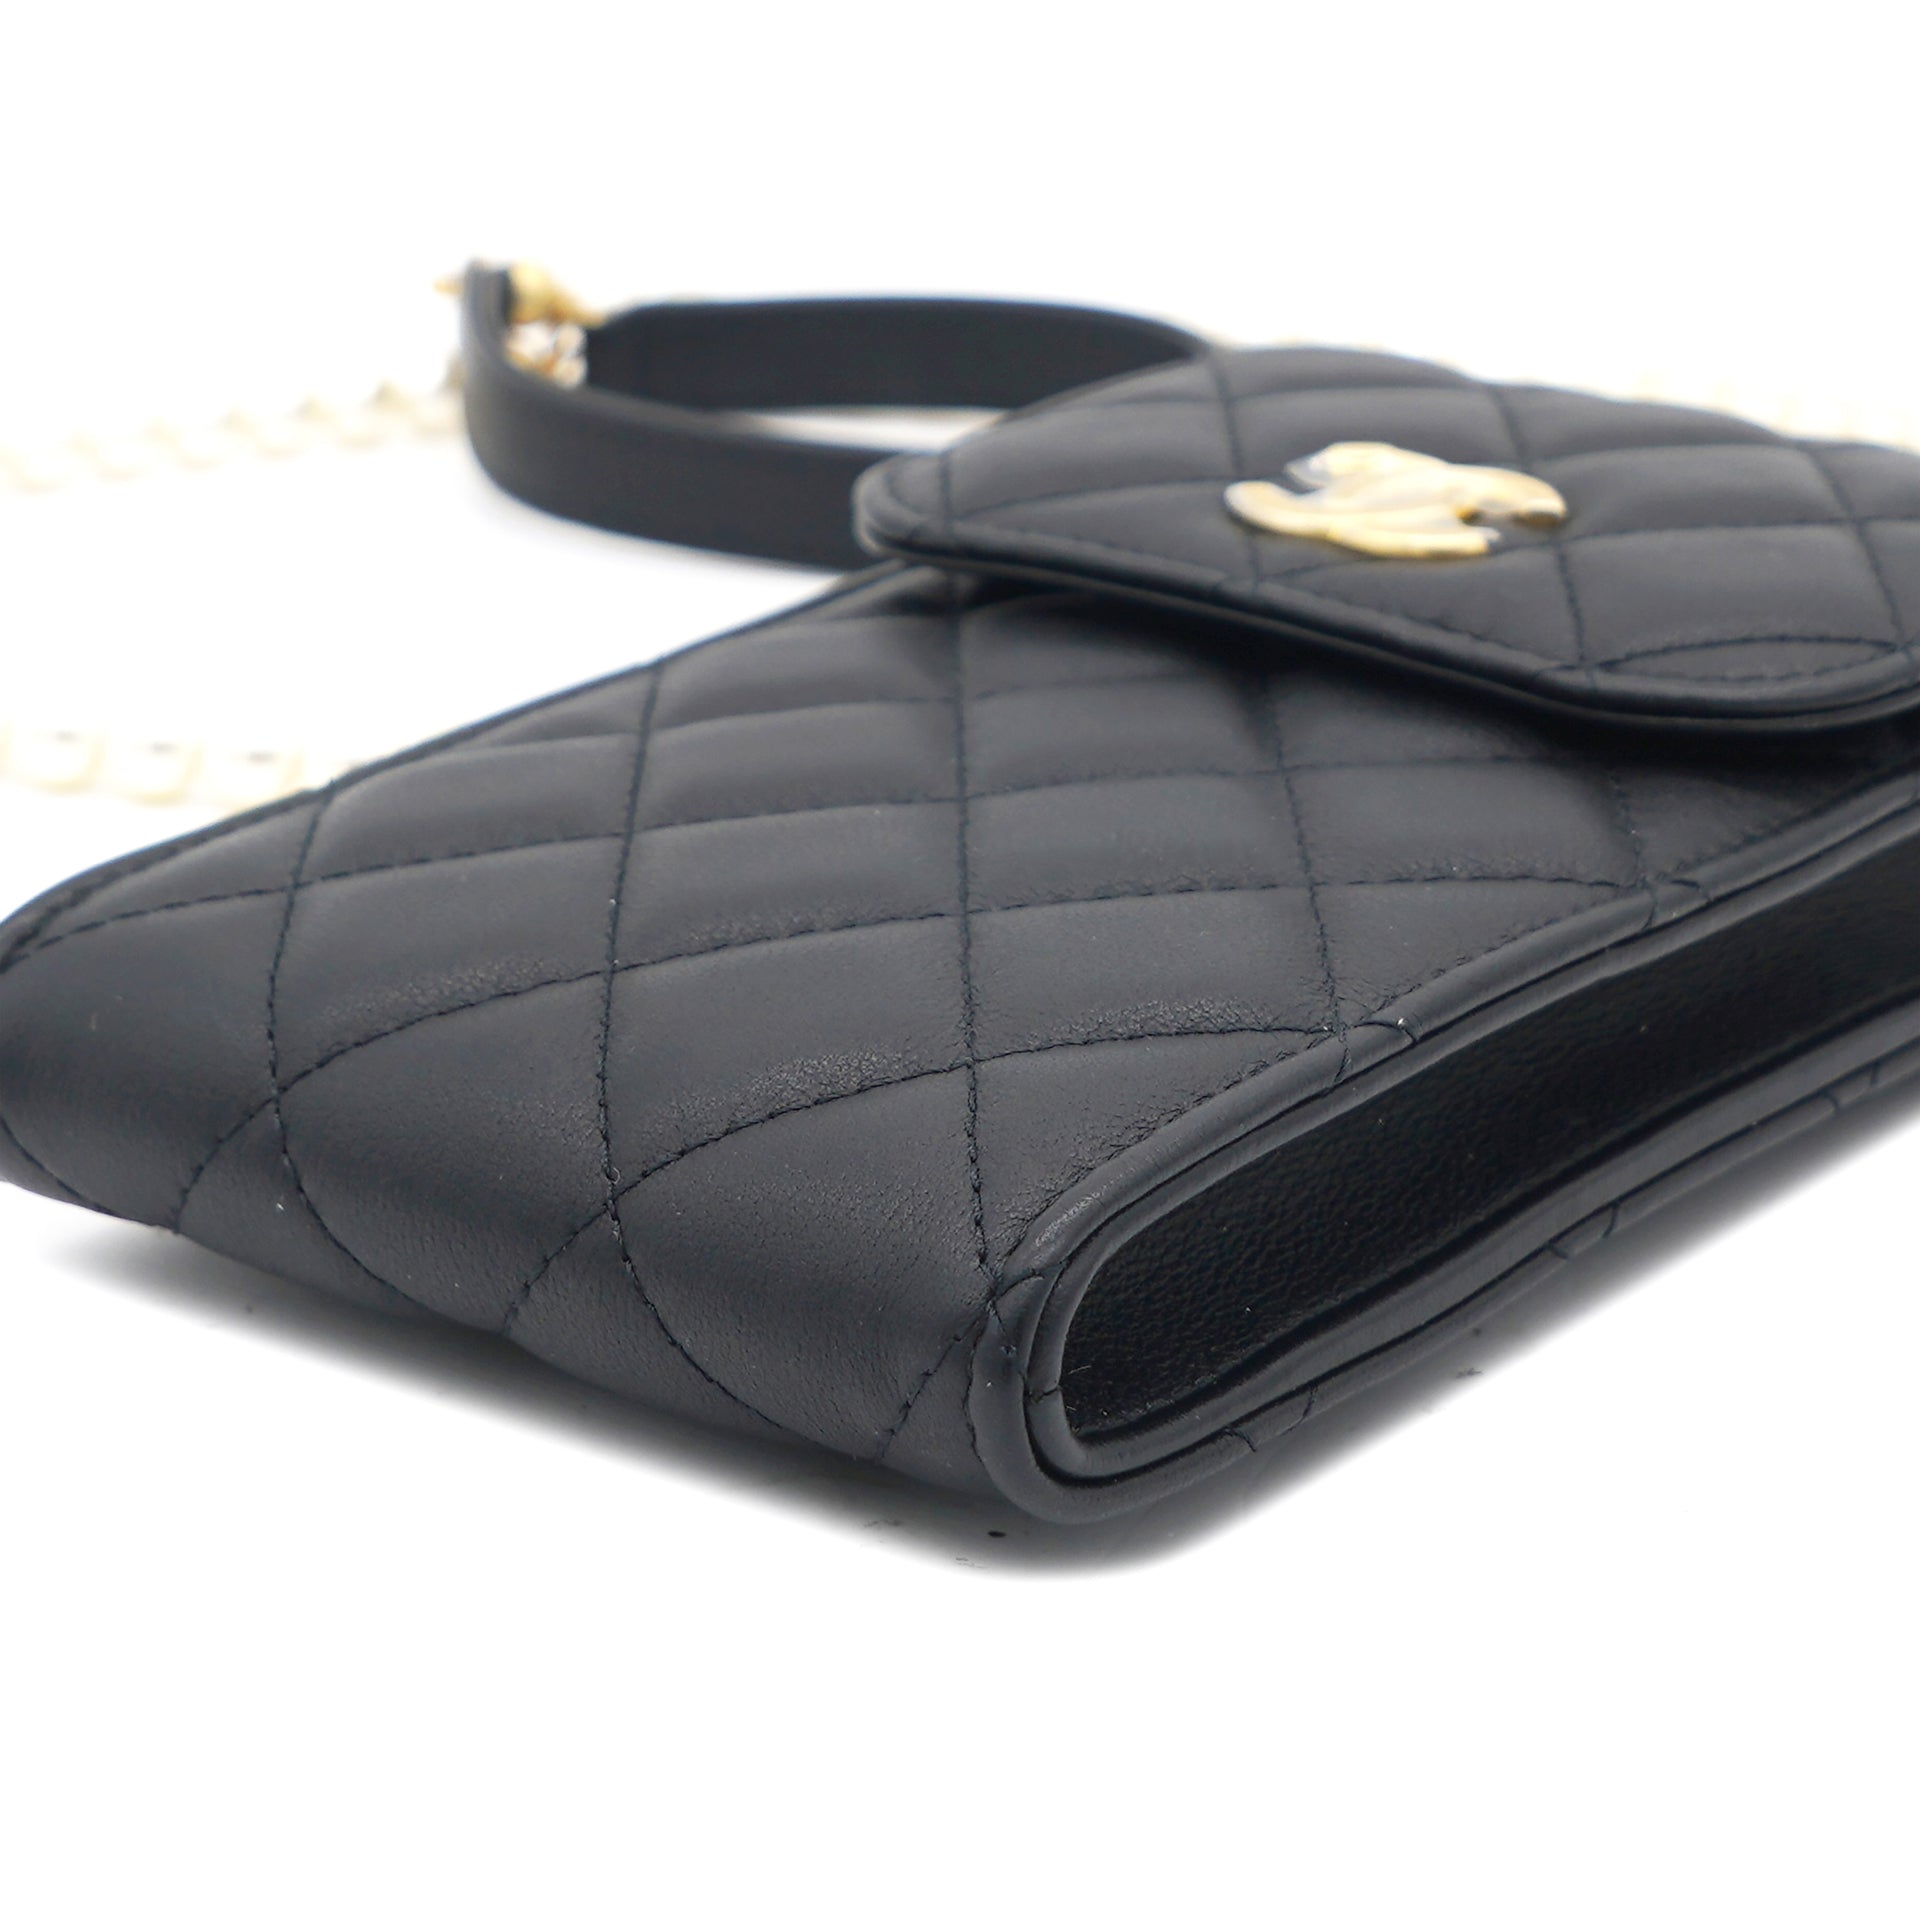 Lambskin Quilted Vertical Pearl Strap Black